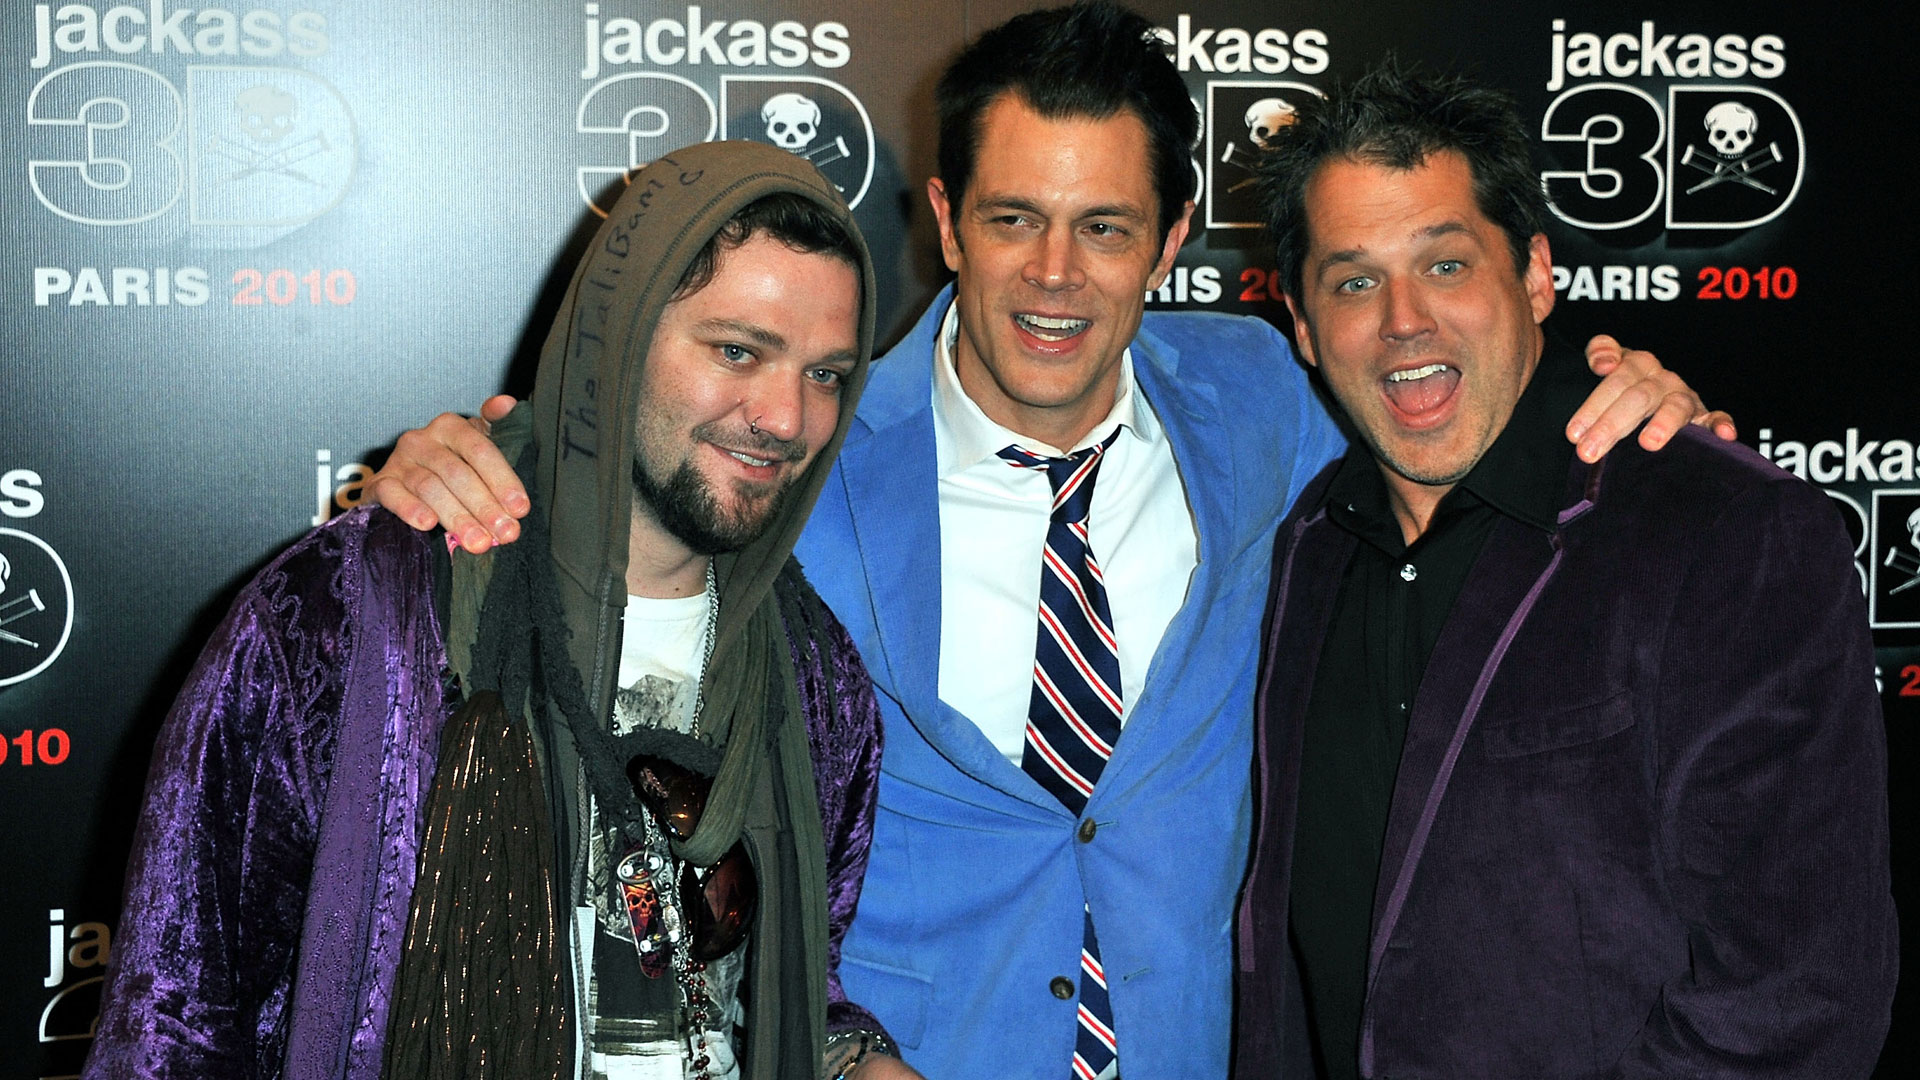 ‘Jackass’ Director Granted 3-Year Restraining Order Against Bam Margera